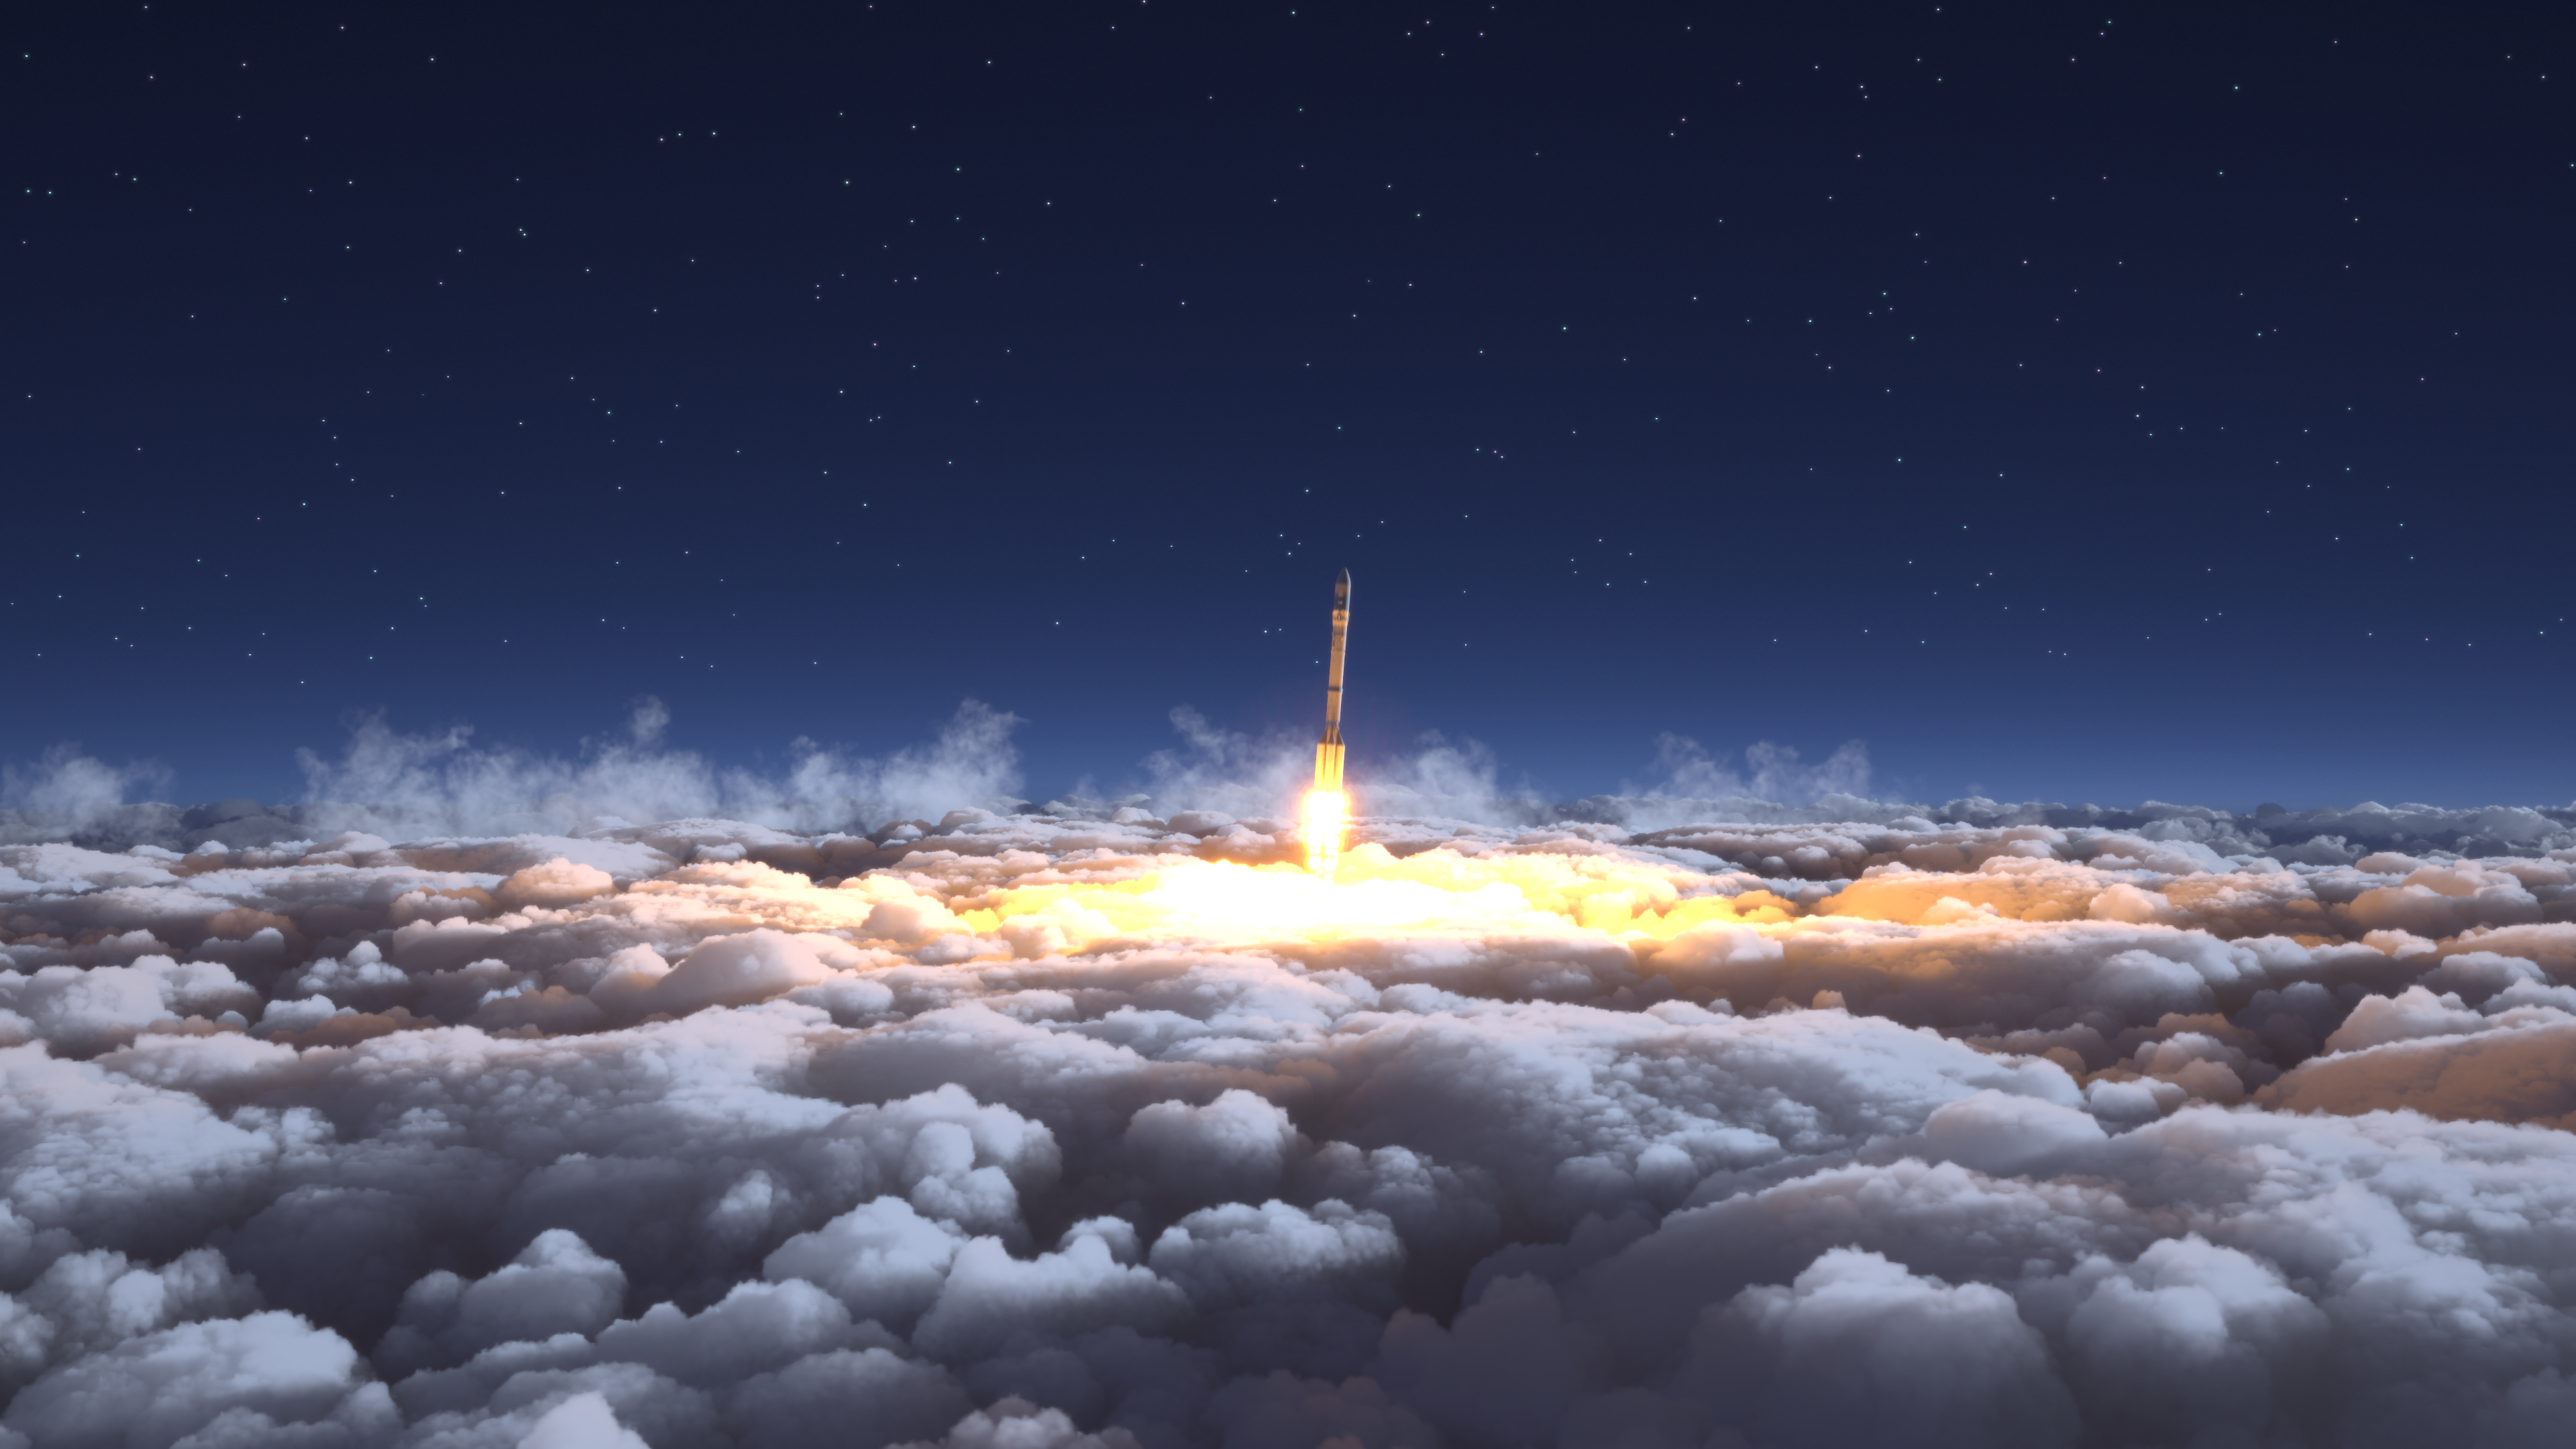 A rocket entering the space above the clouds